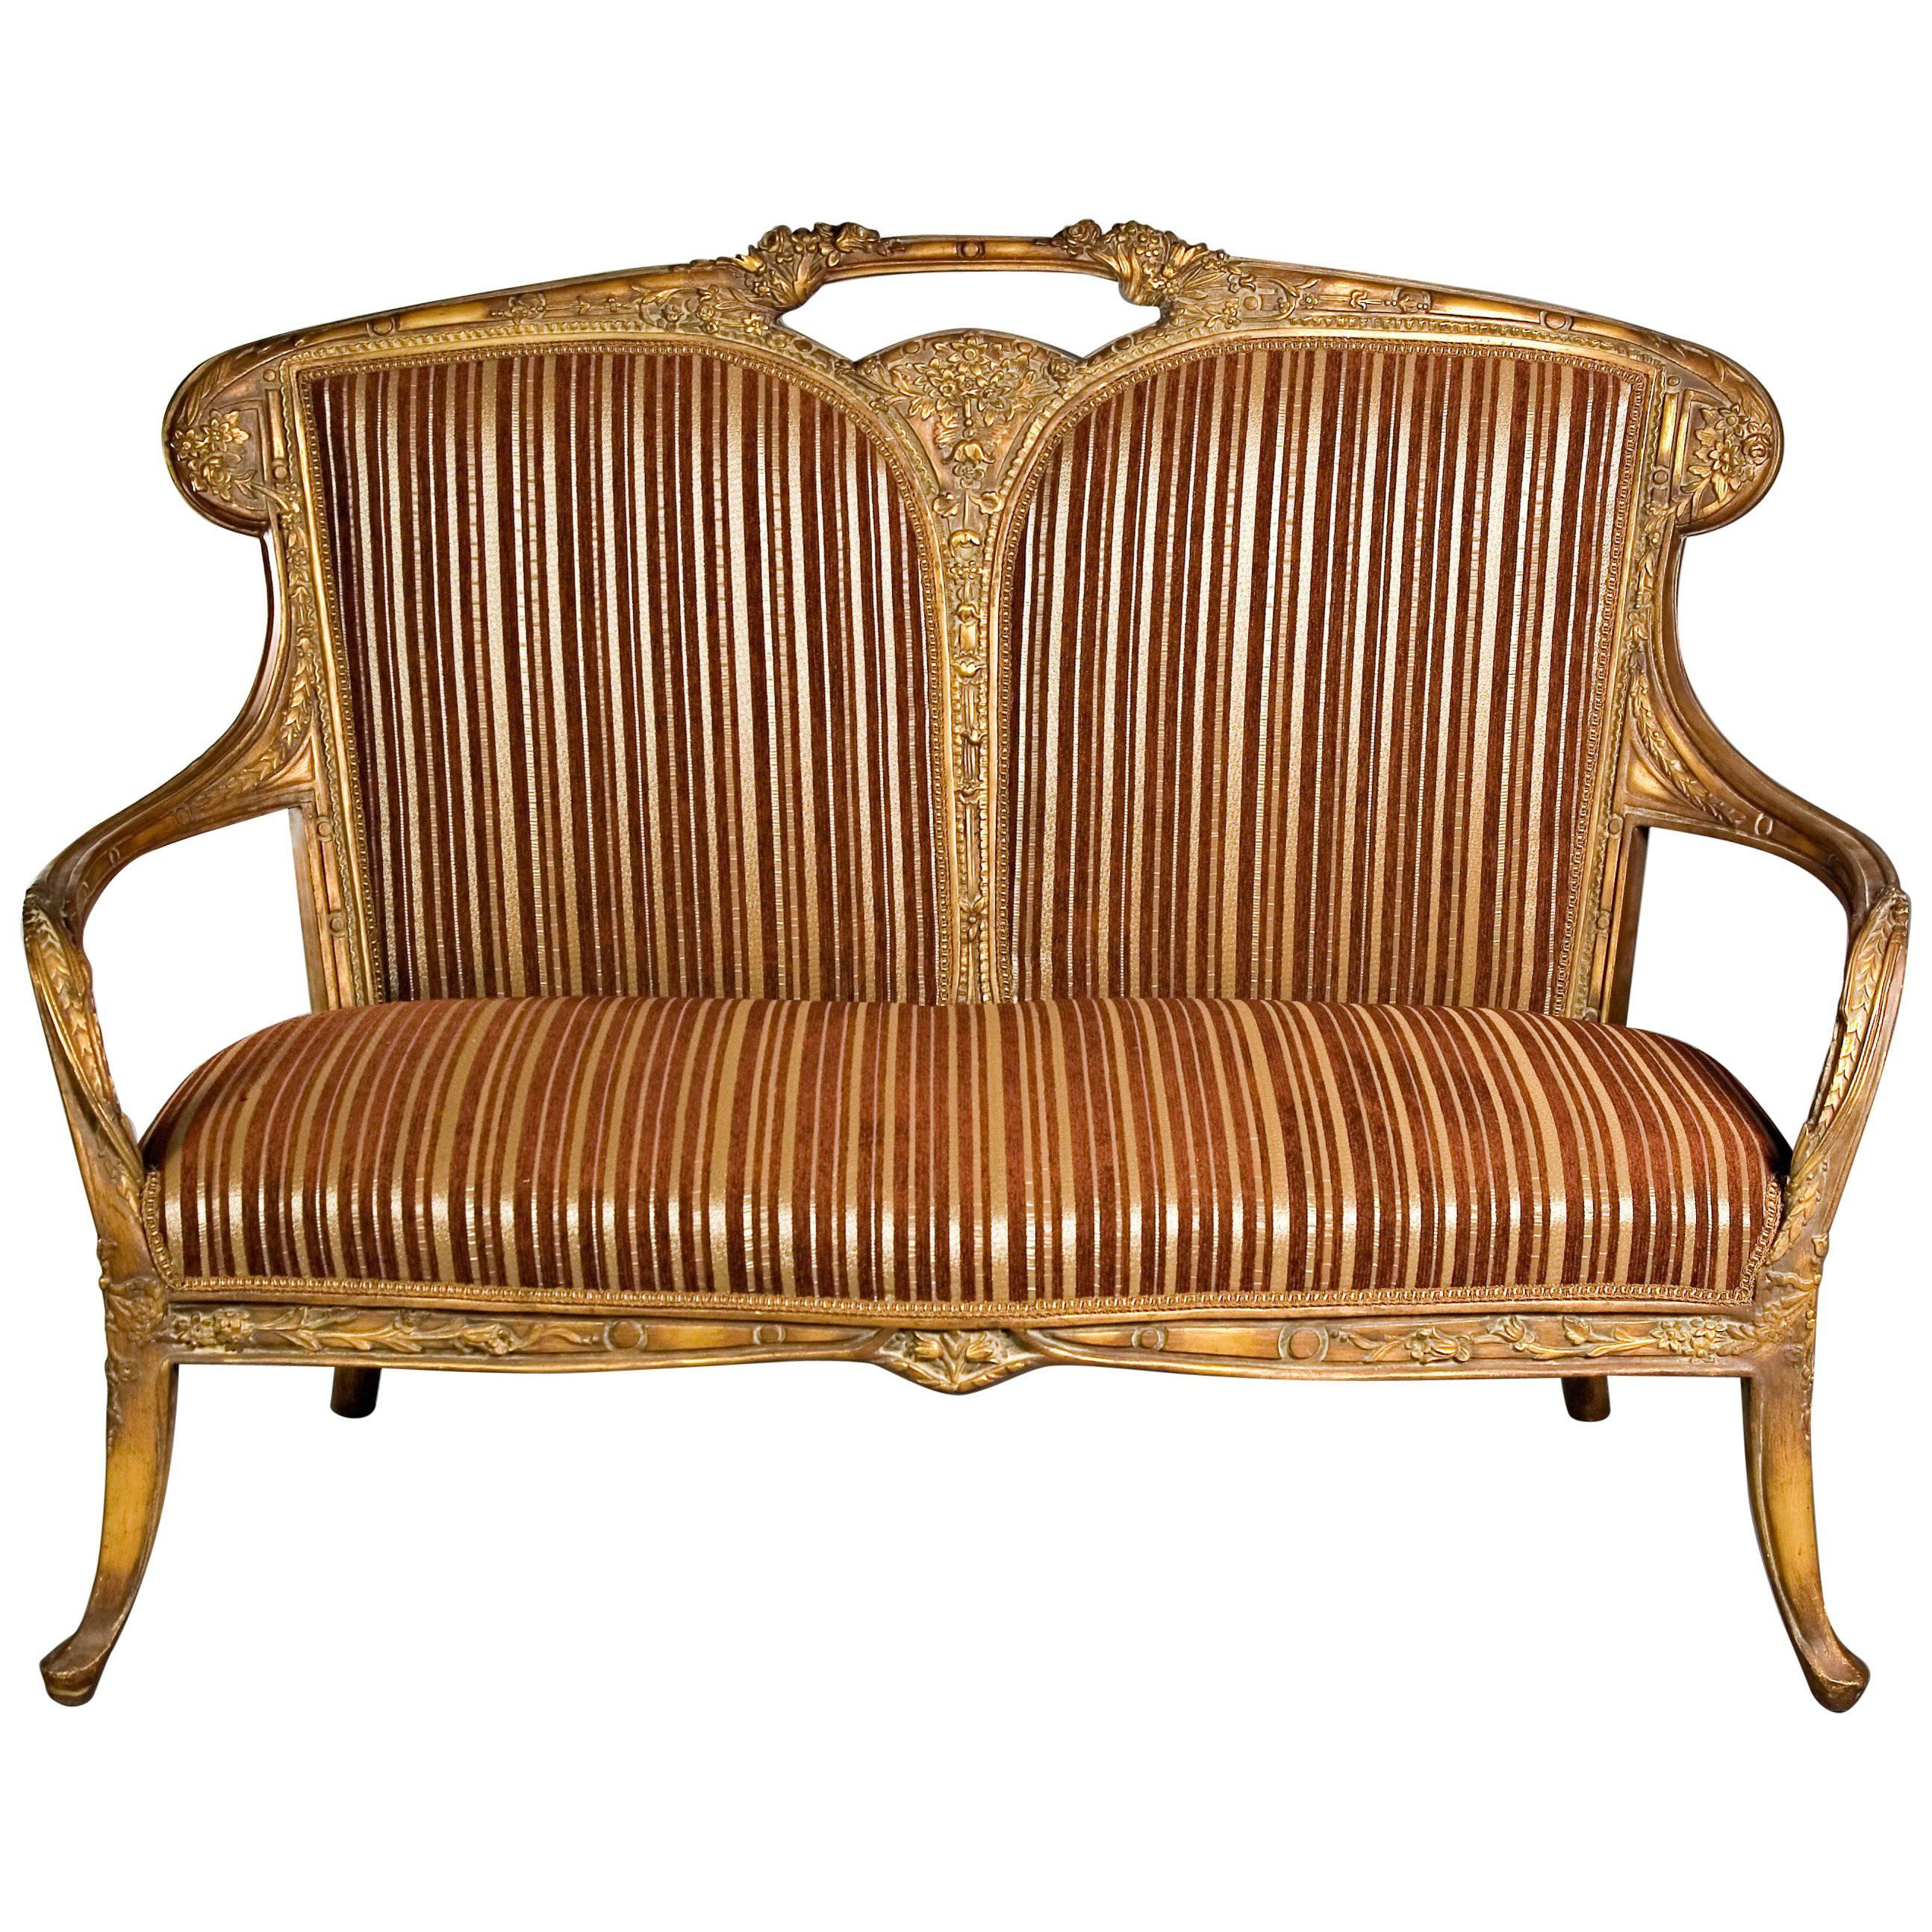 20th Century French Sofa in the Art Nouveau Style Beechwood